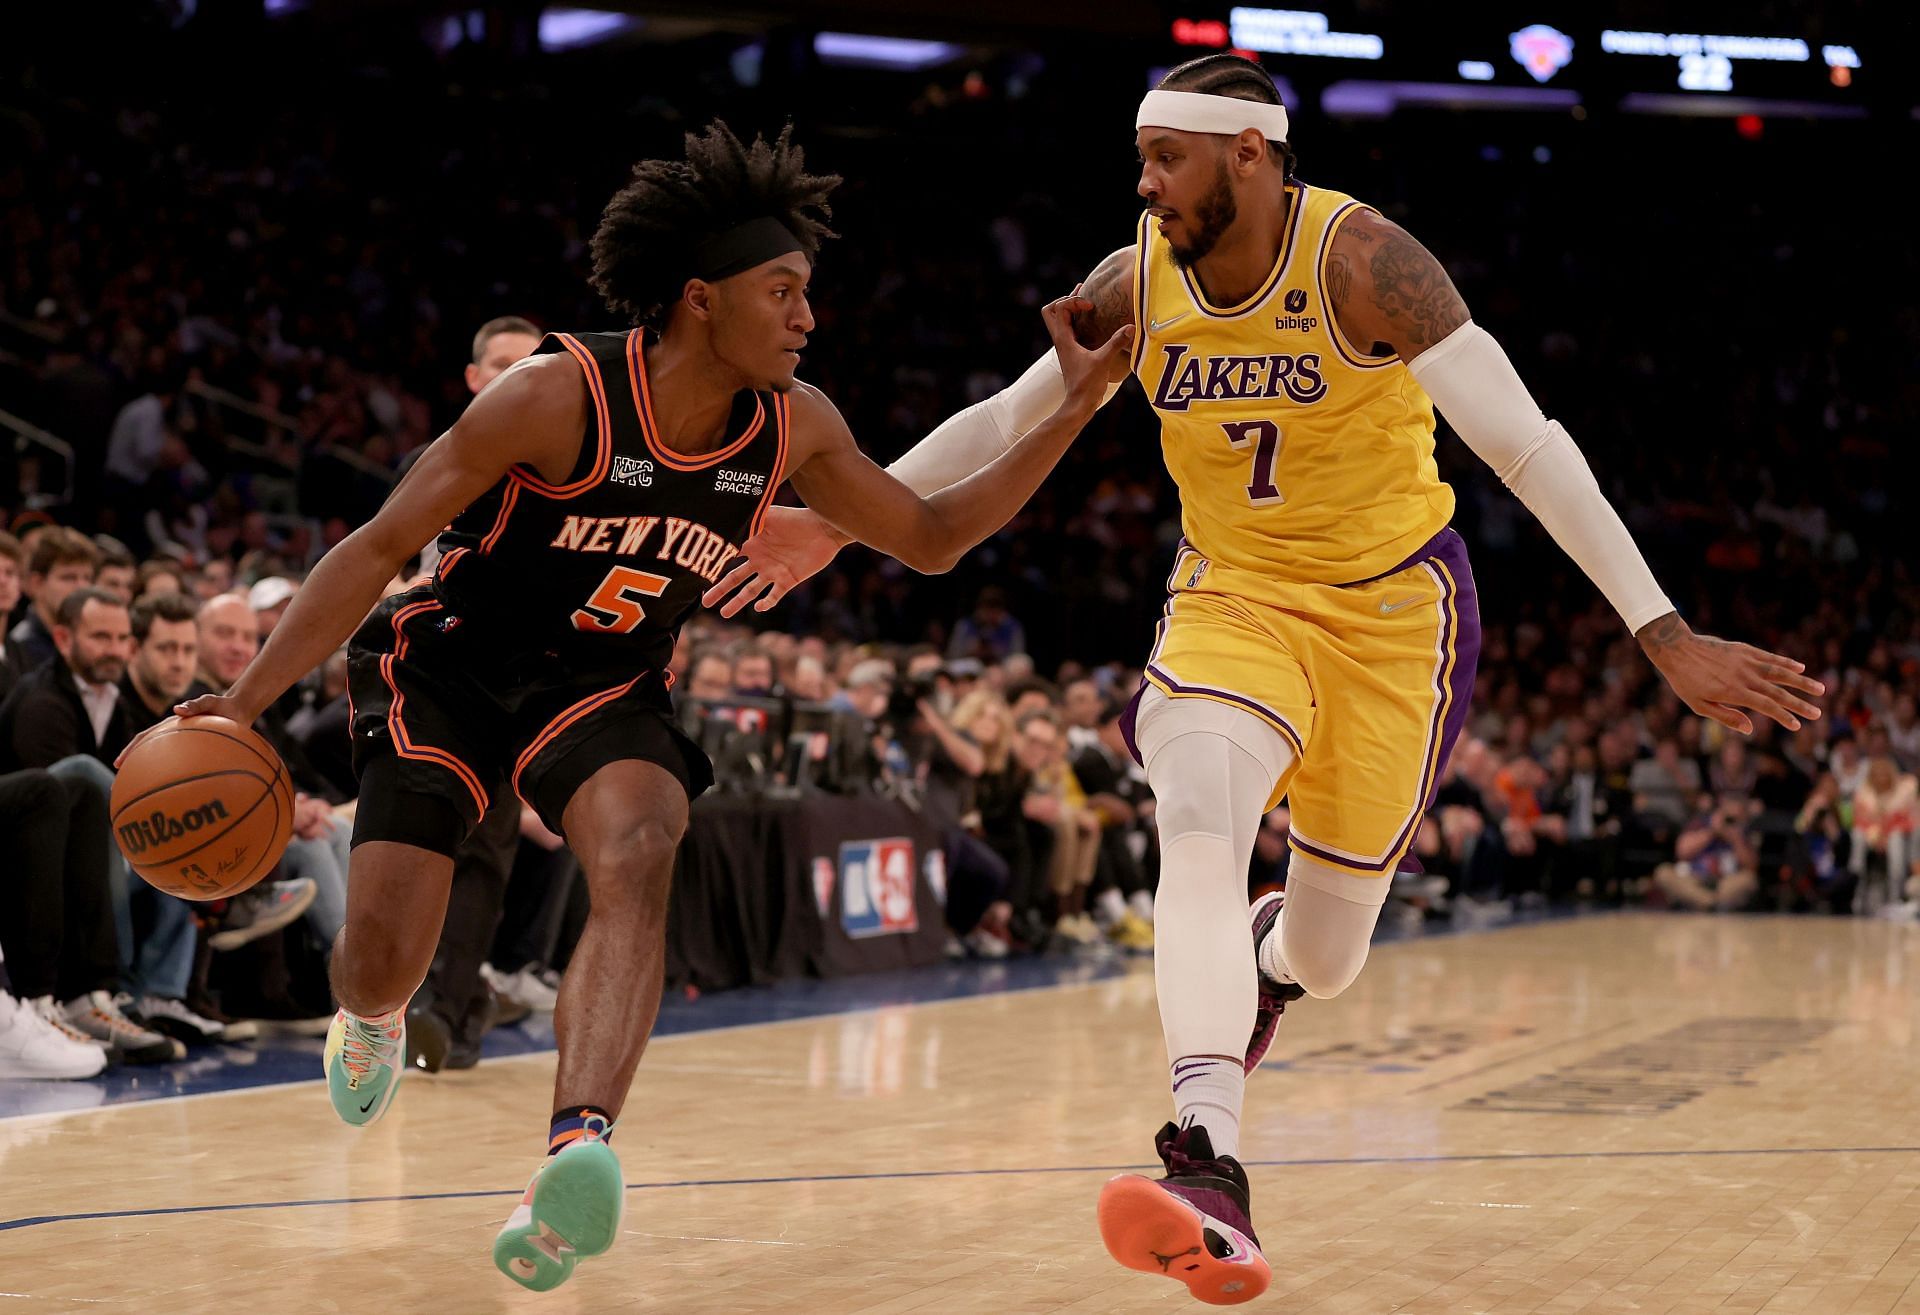 The LA Lakers&#039; recent game against the New York Knicks ended in a disappointing 106-100 defeat for them